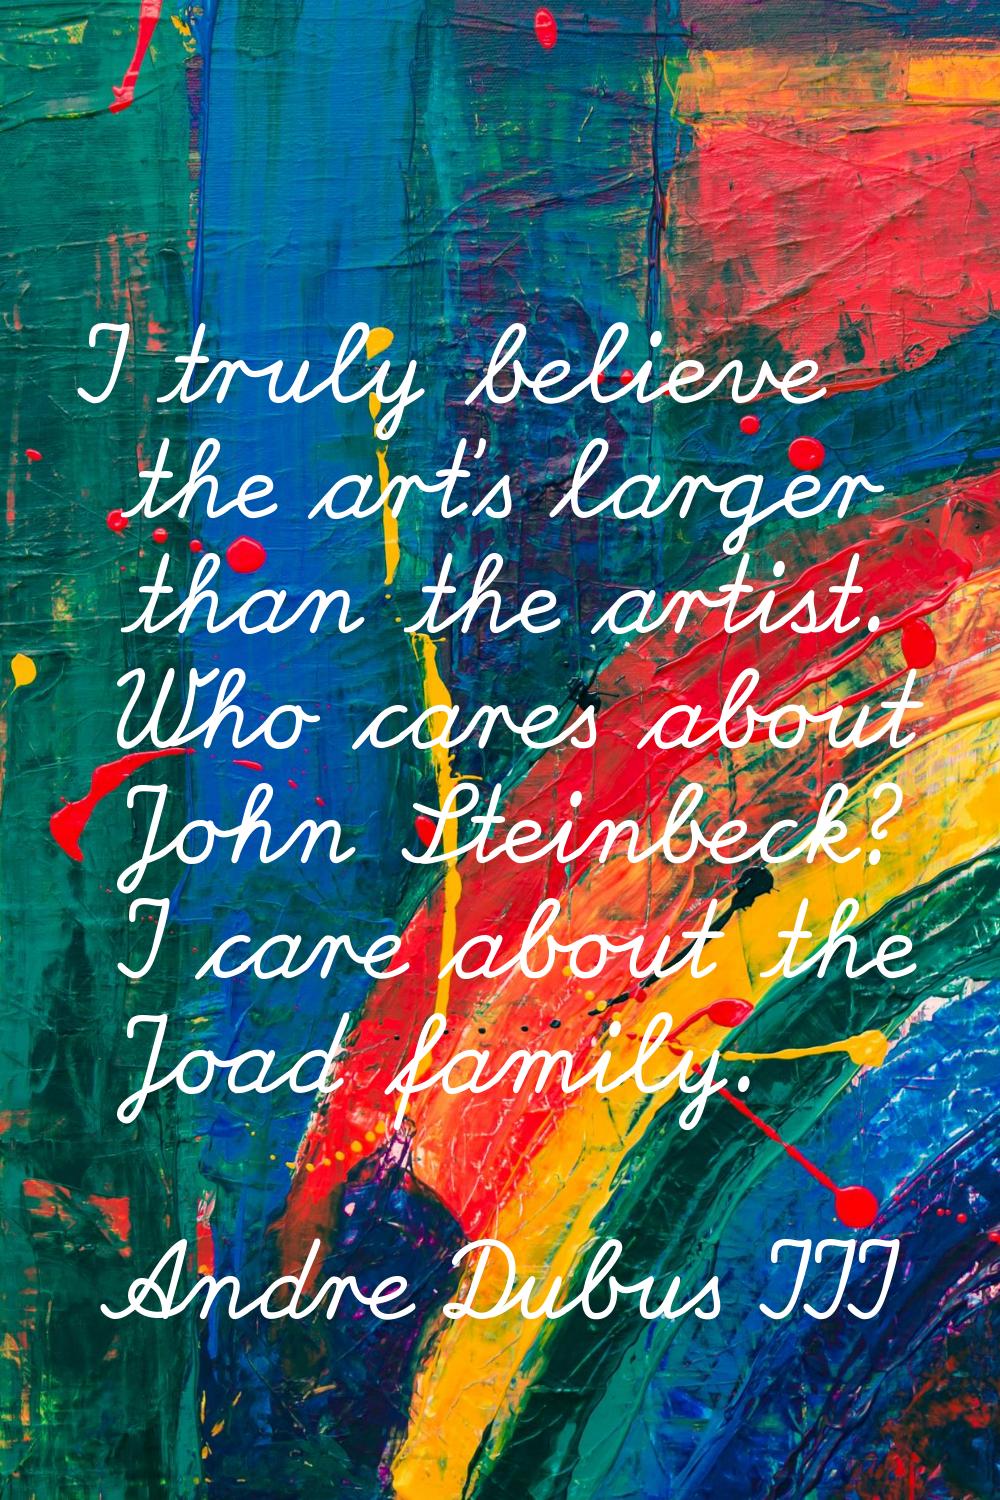 I truly believe the art's larger than the artist. Who cares about John Steinbeck? I care about the 